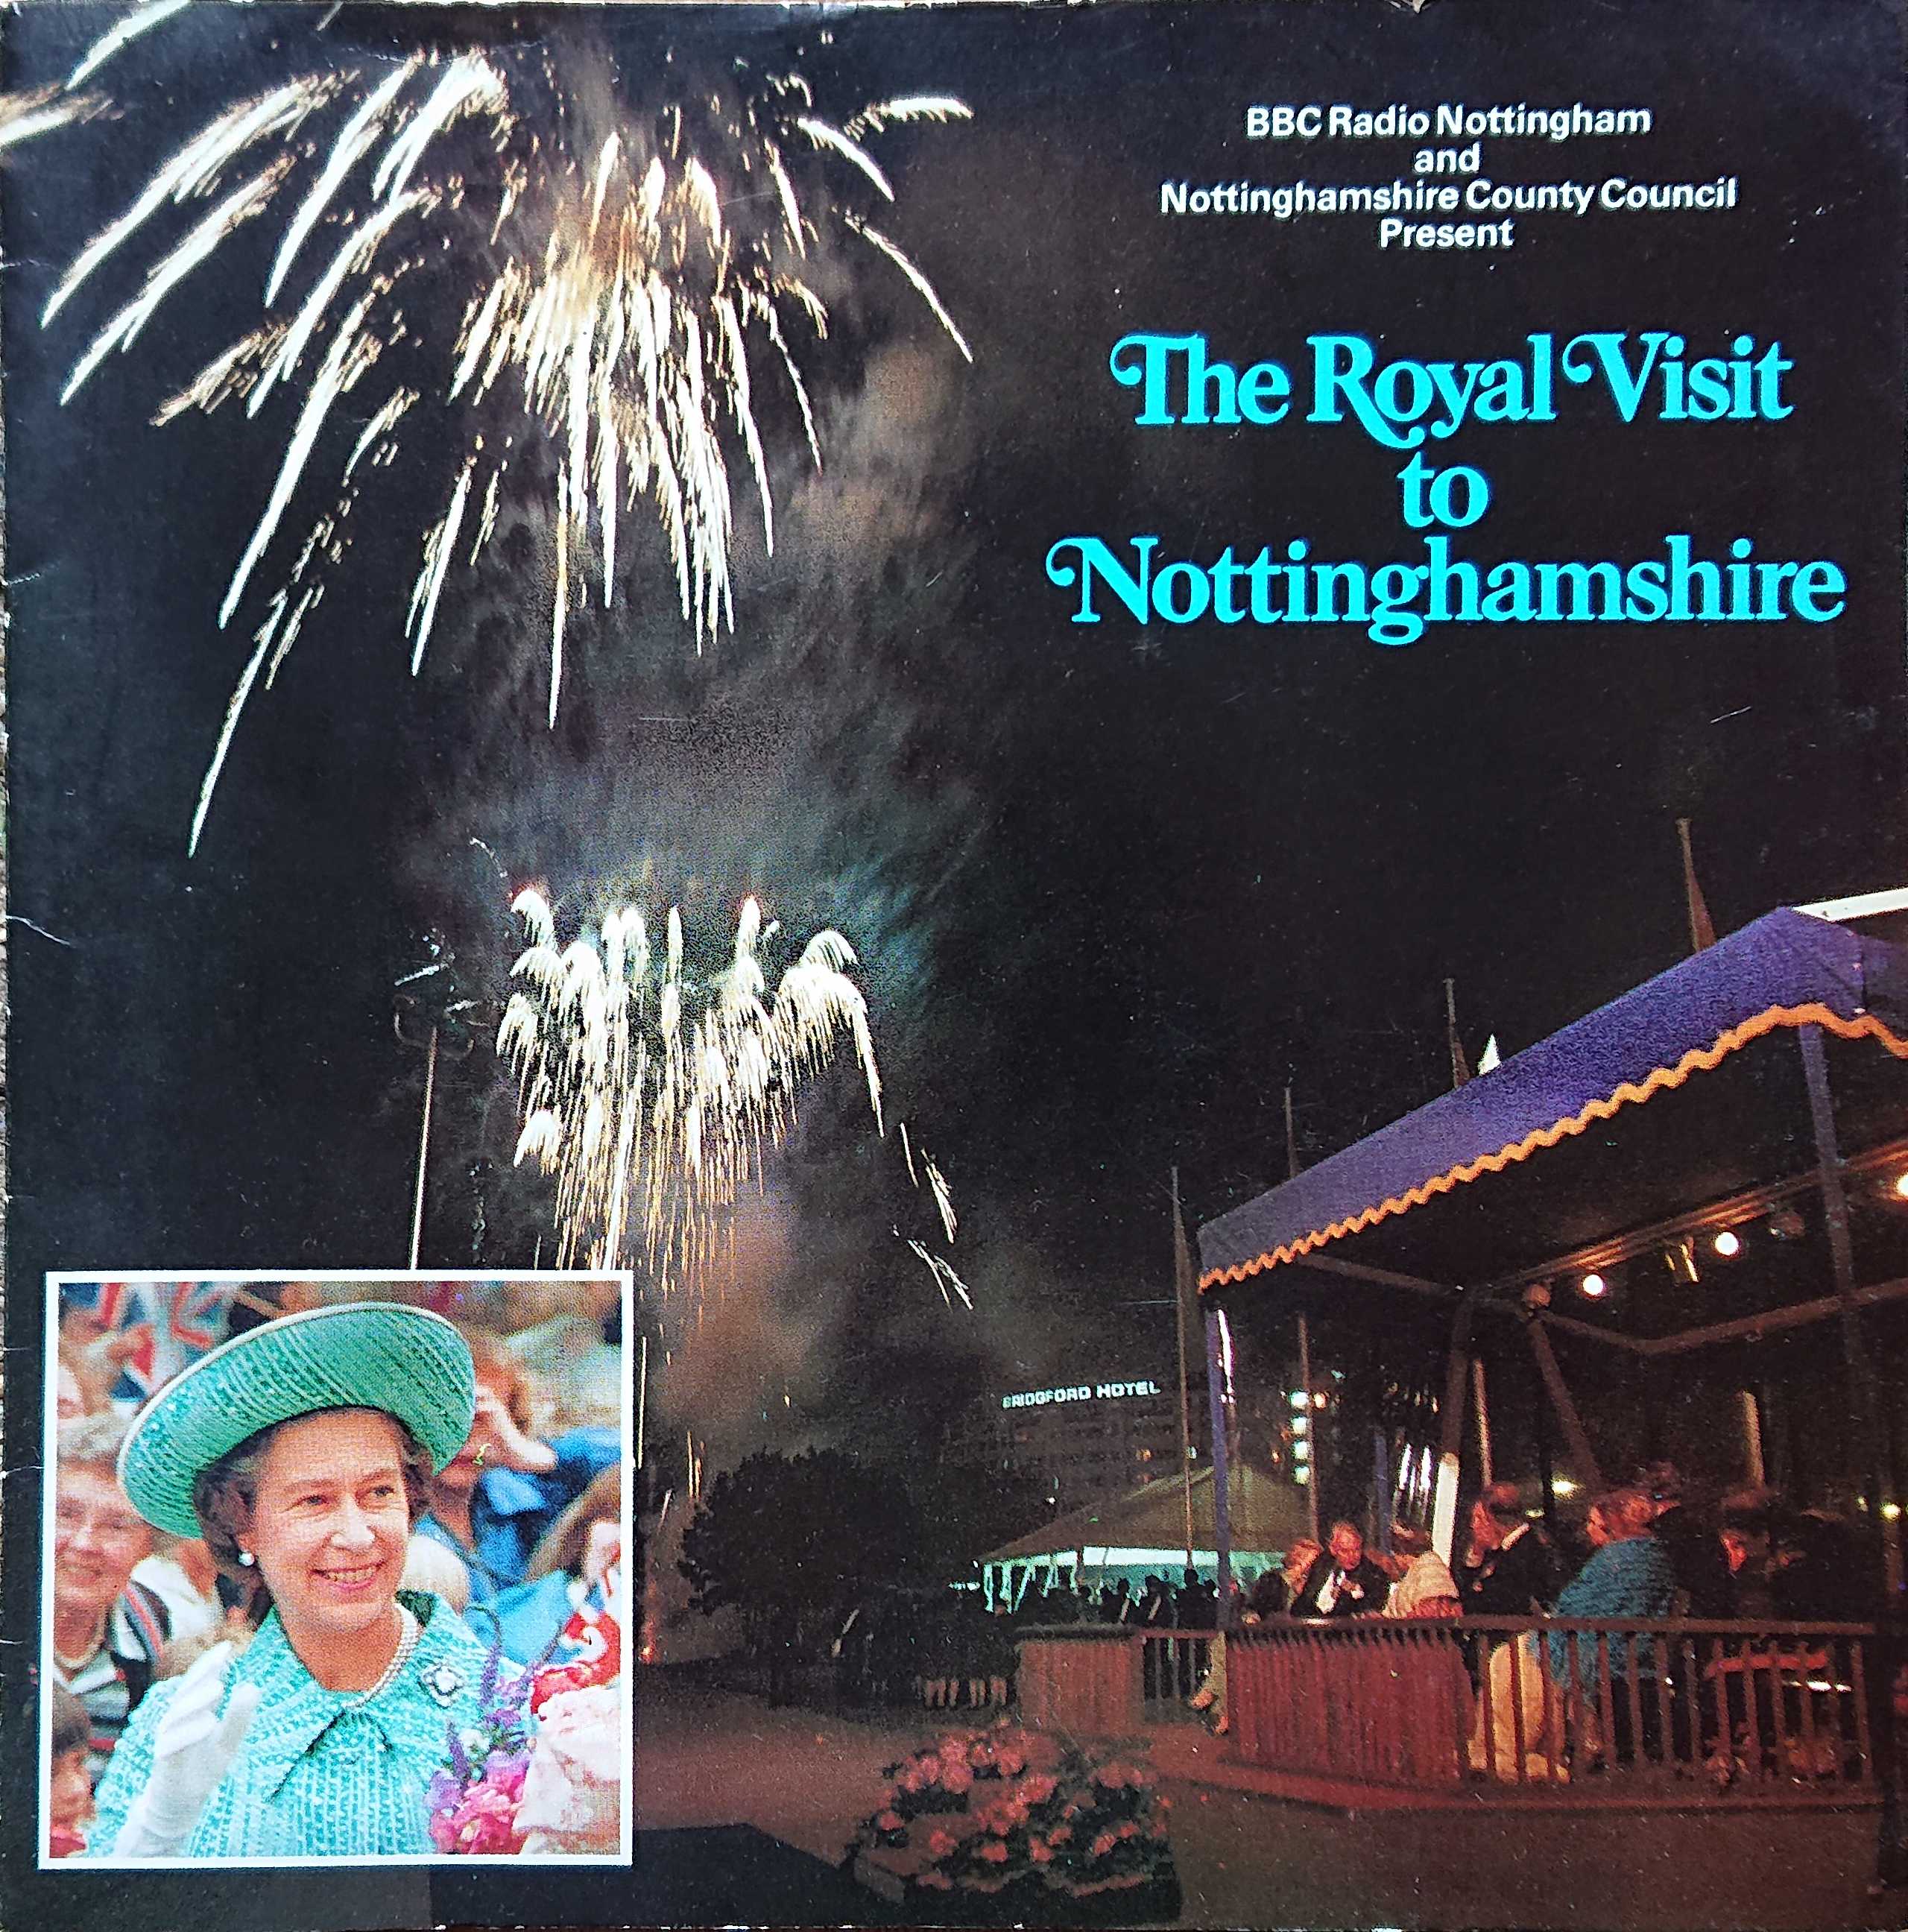 Picture of NG - 1 The Royal visit to Nottinghamshire by artist Dennis McCarthy / John Lilley / Alastair McDougall / Sandi Marshall from the BBC singles - Records and Tapes library